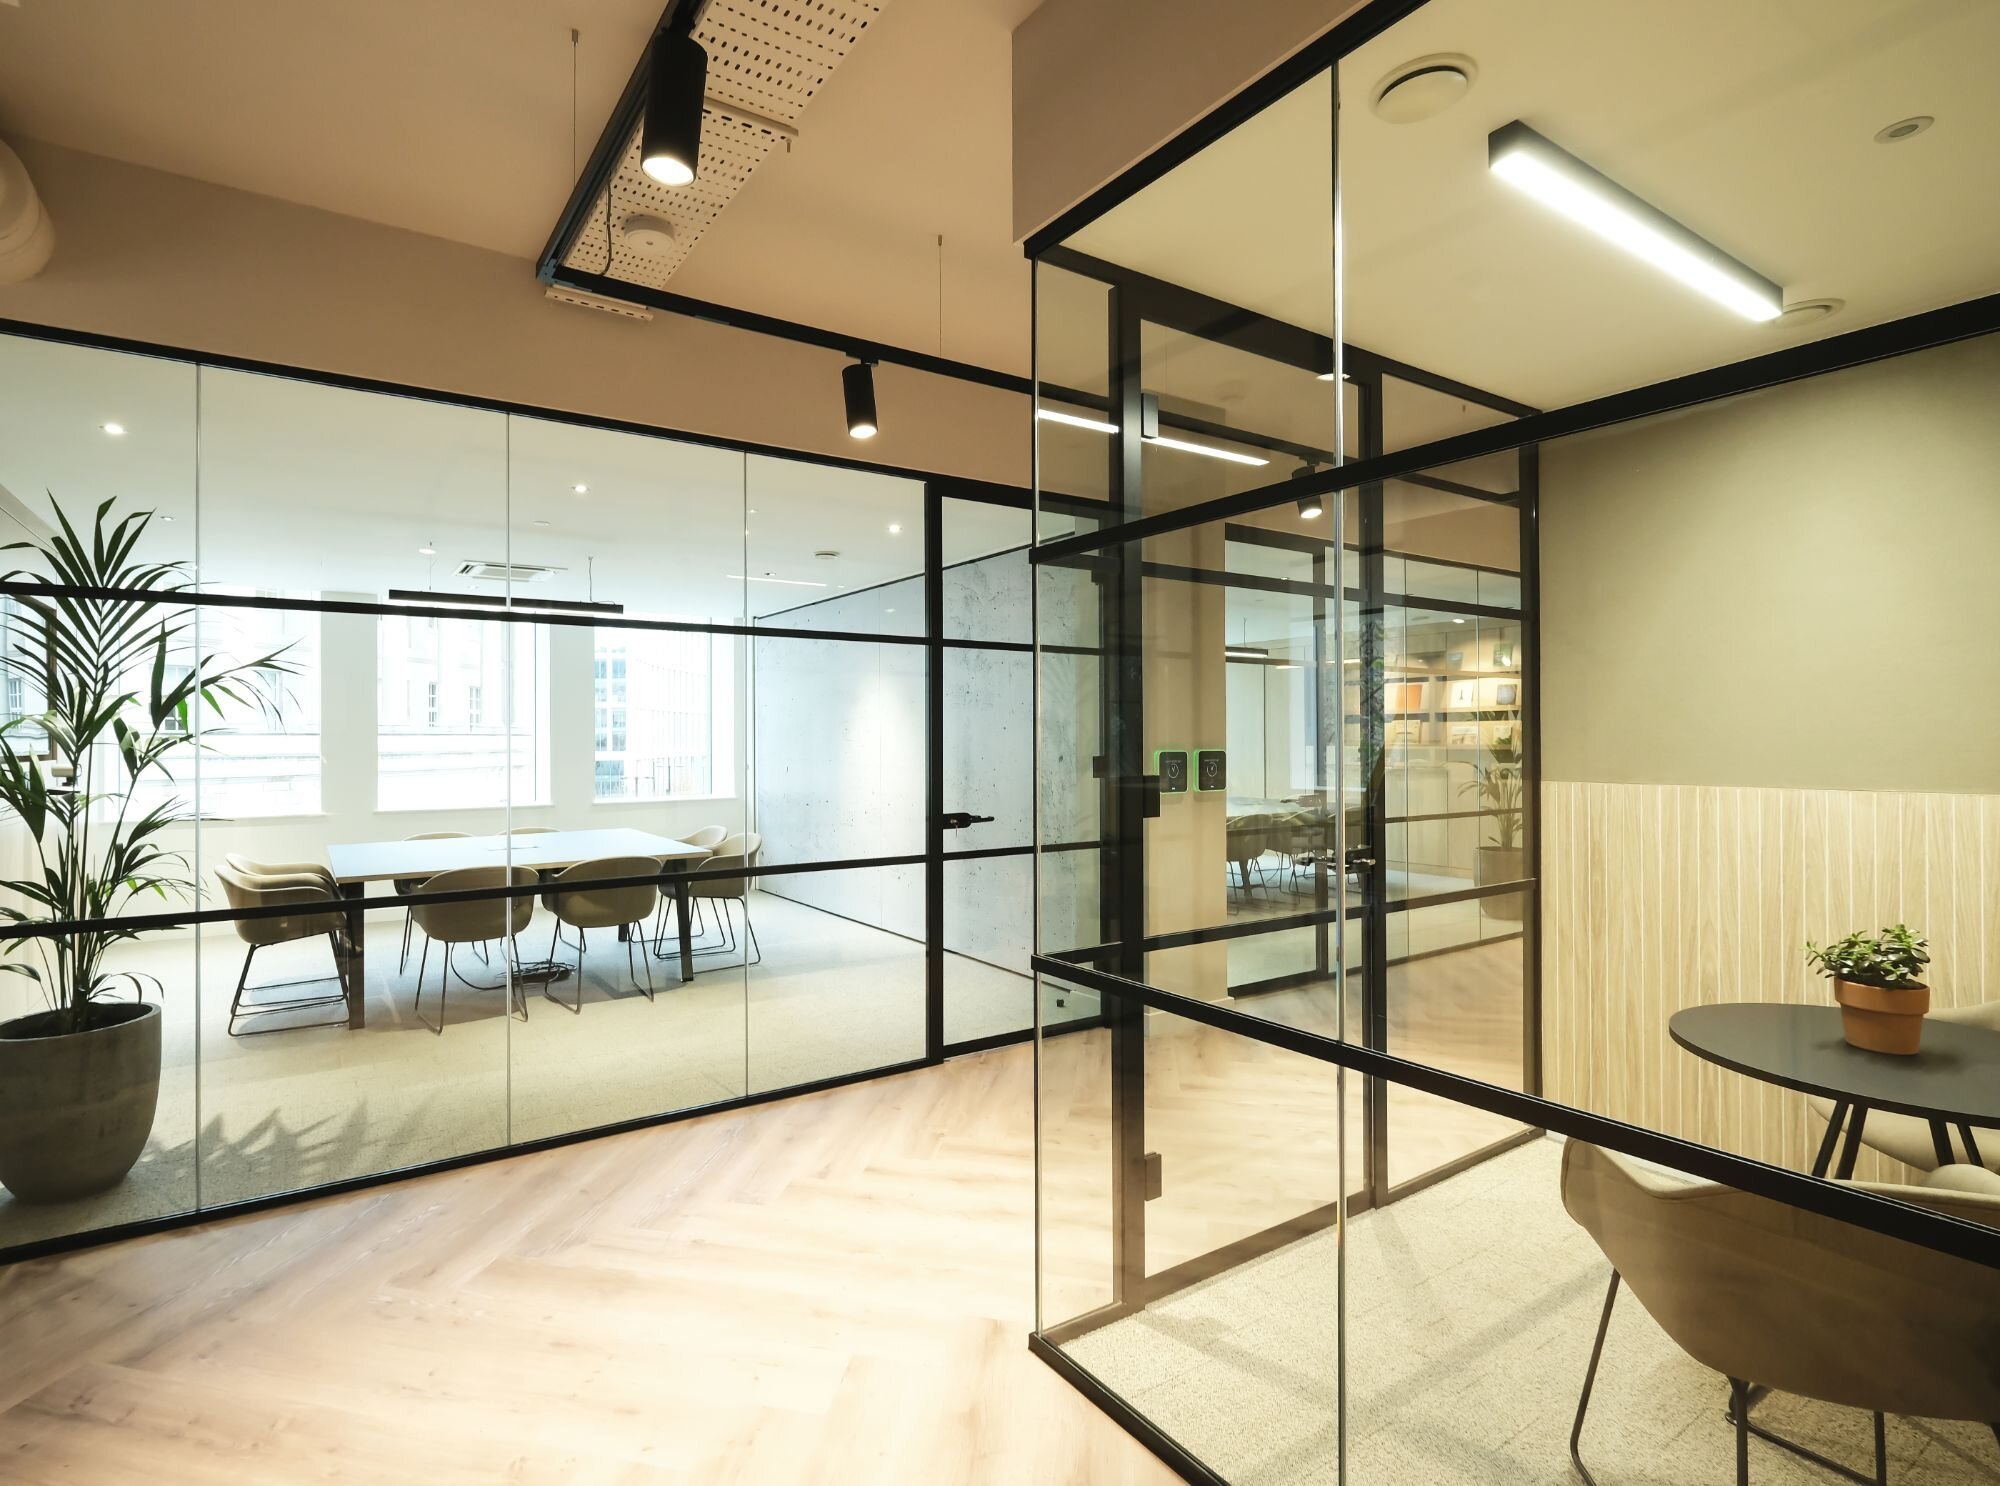 Office lighting for a contemporary BREEM rated CAT B fitout at 10-12 Mount Street, Manchester.